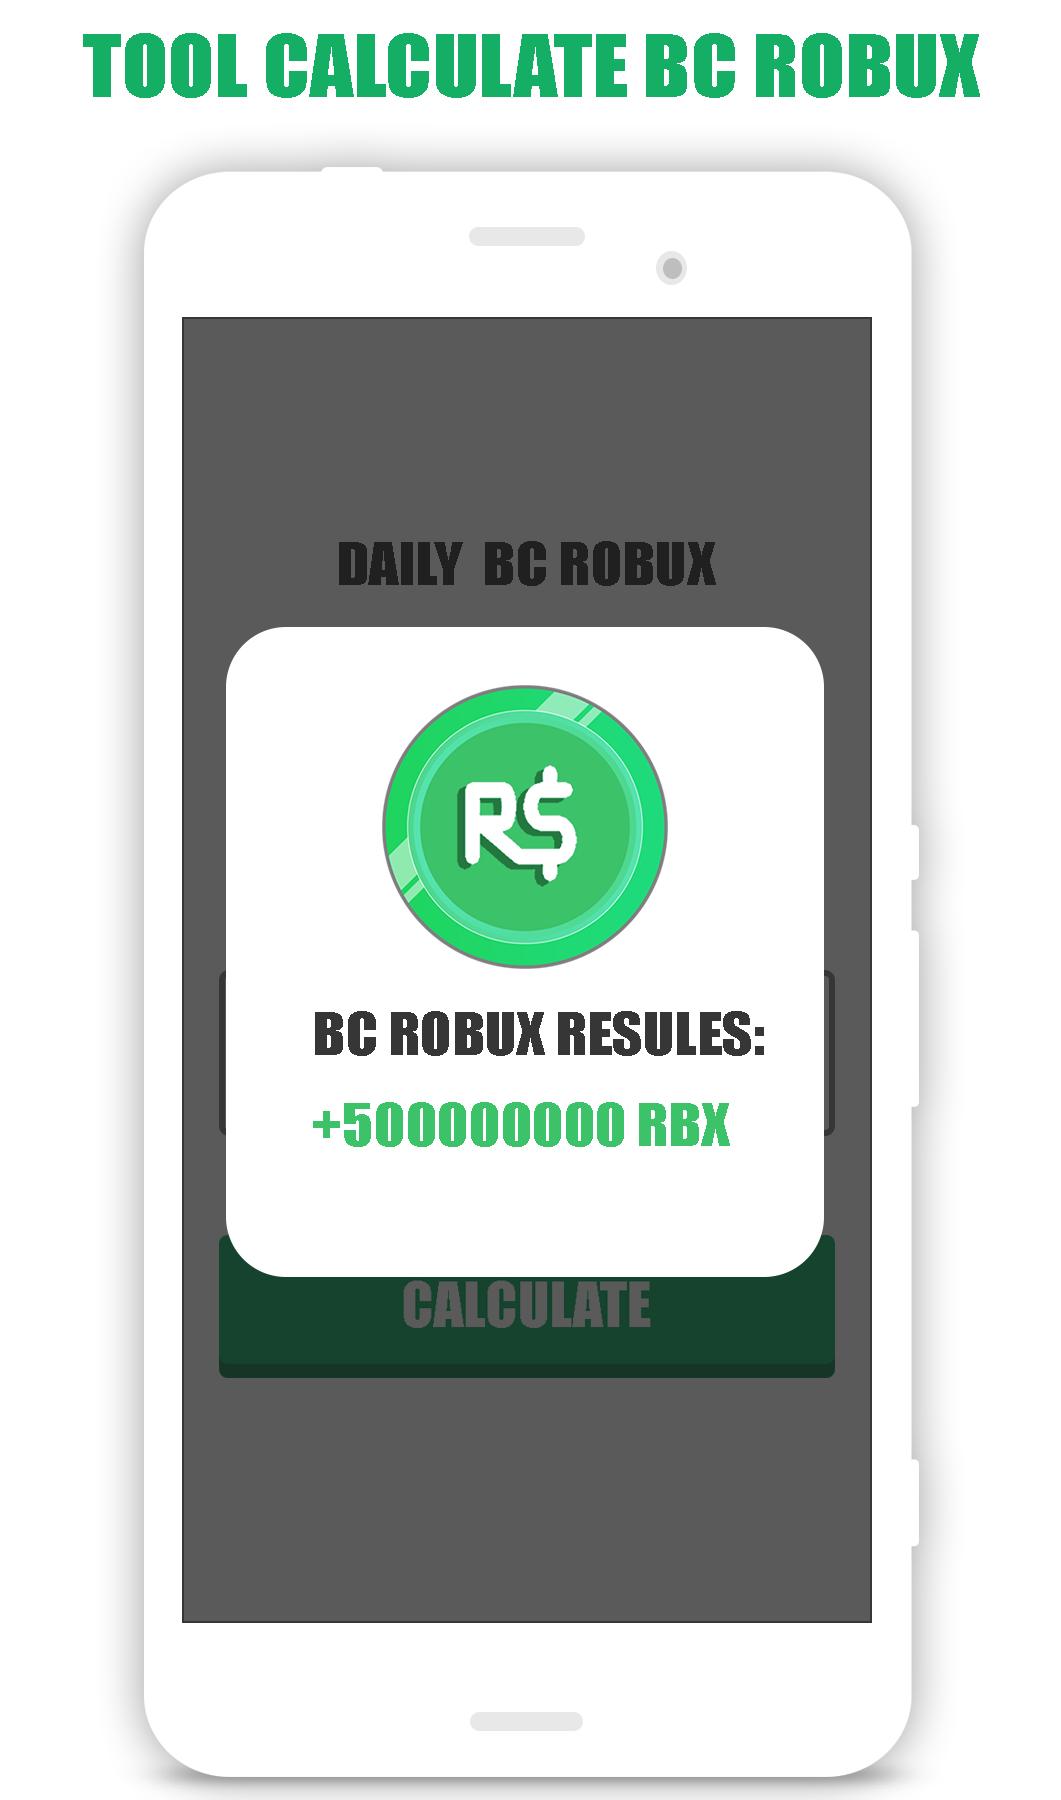 Free Robux Calculator For Roblox For Android Apk Download - free robux calc for rblox rbx station 10 android